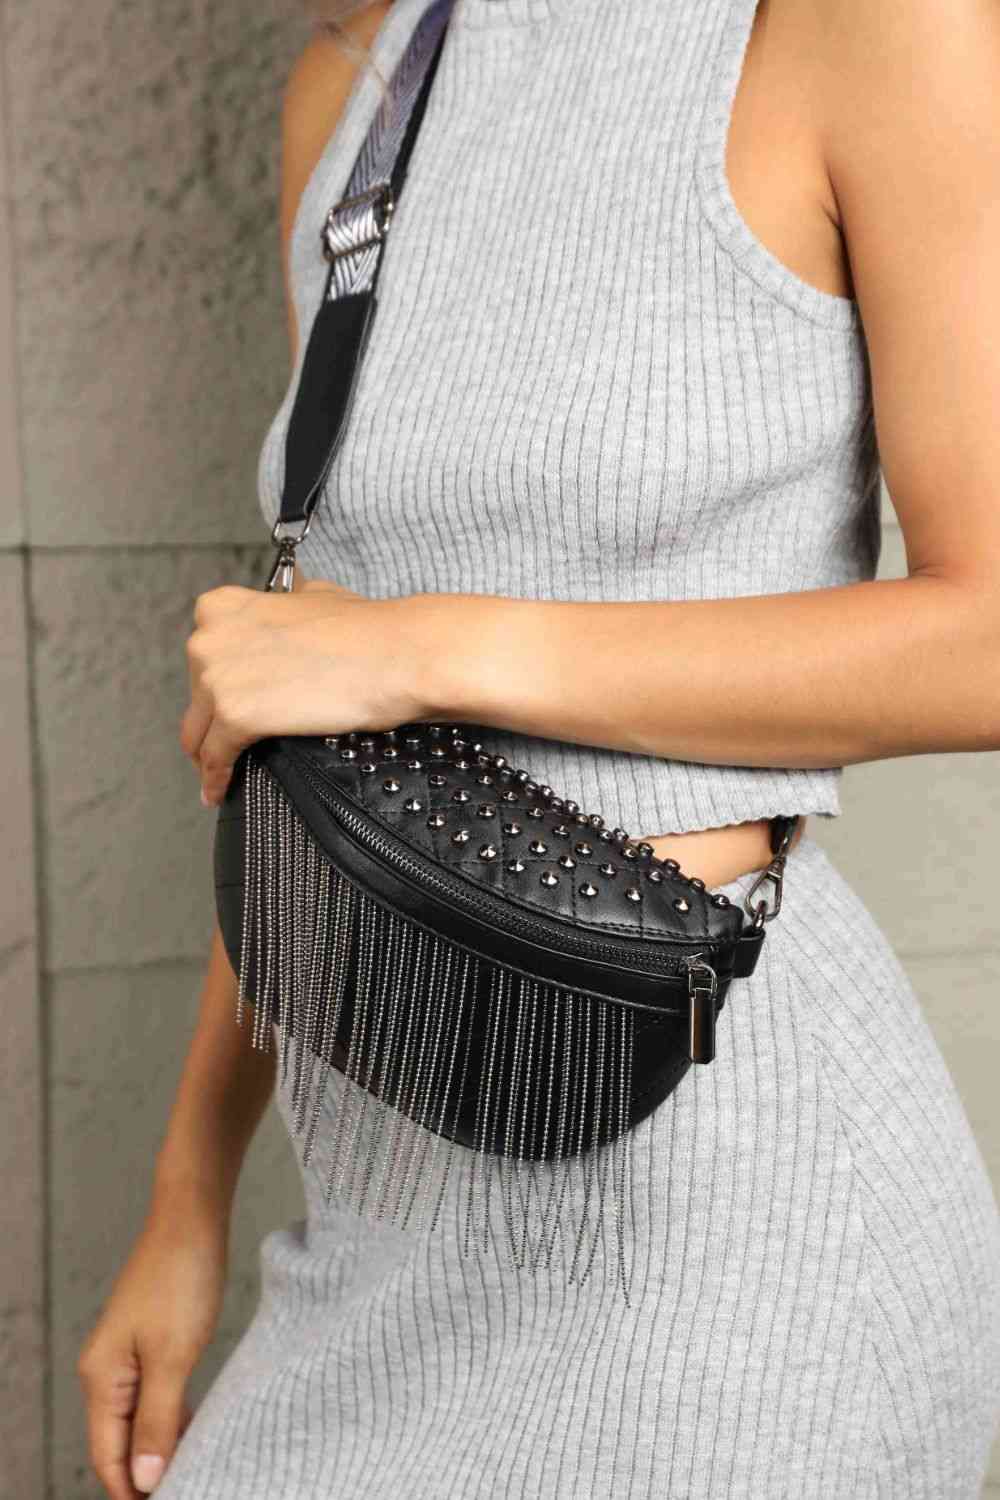 Alt text for an image of the "Adored PU Leather Studded Sling Bag with Fringes" might be:  "An elegant black PU leather sling bag adorned with studs and fringes, perfect for adding a touch of style and sophistication to any outfit."